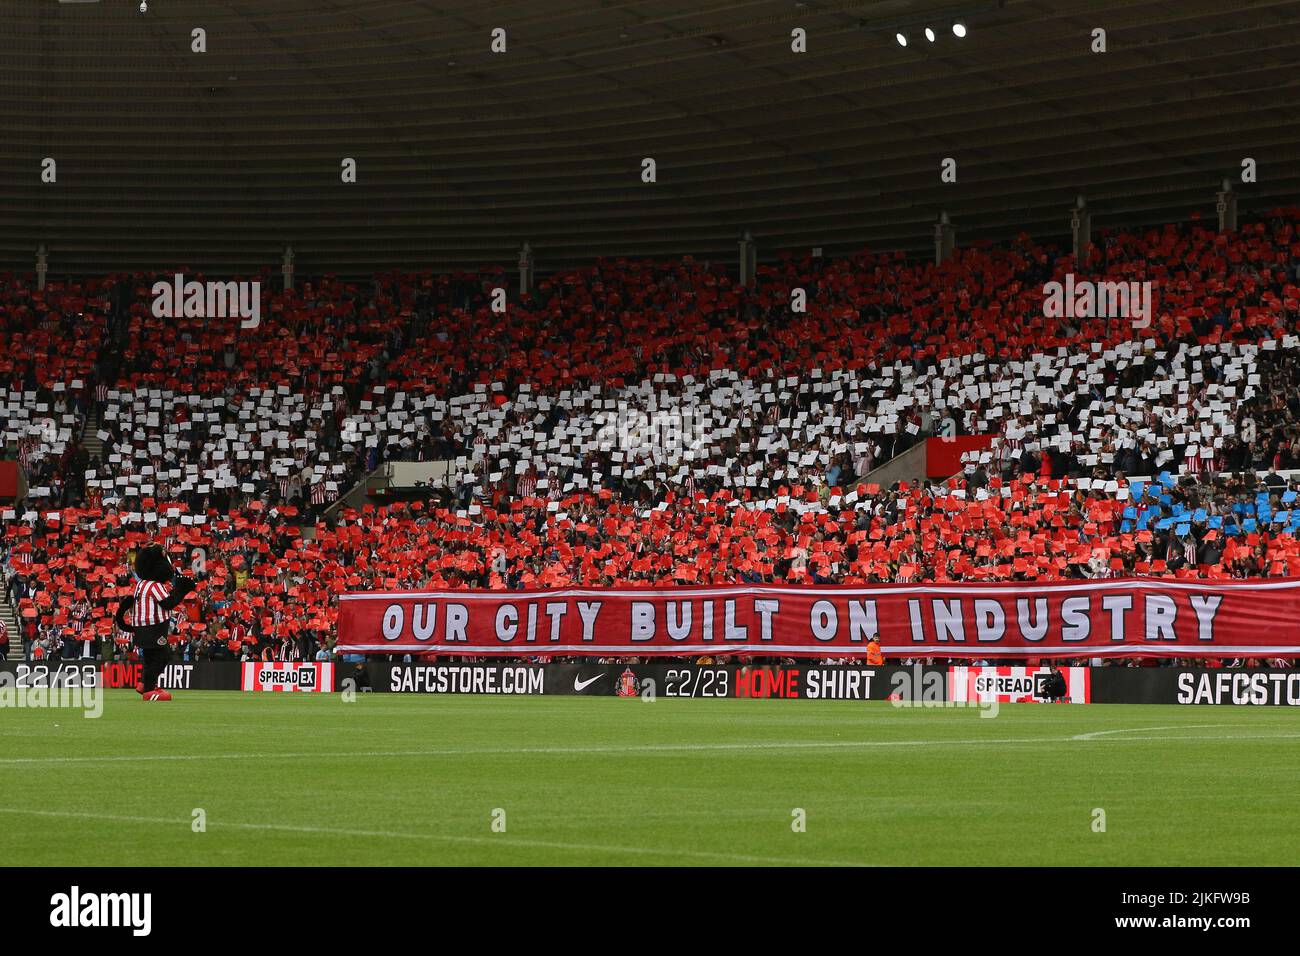 Sunderland fans hold up cards and banner ahead of the match - Sunderland v Coventry City, Sky Bet Championship, Stadium of Light, Sunderland, UK - 31st July 2022  Editorial Use Only - DataCo restrictions apply Stock Photo